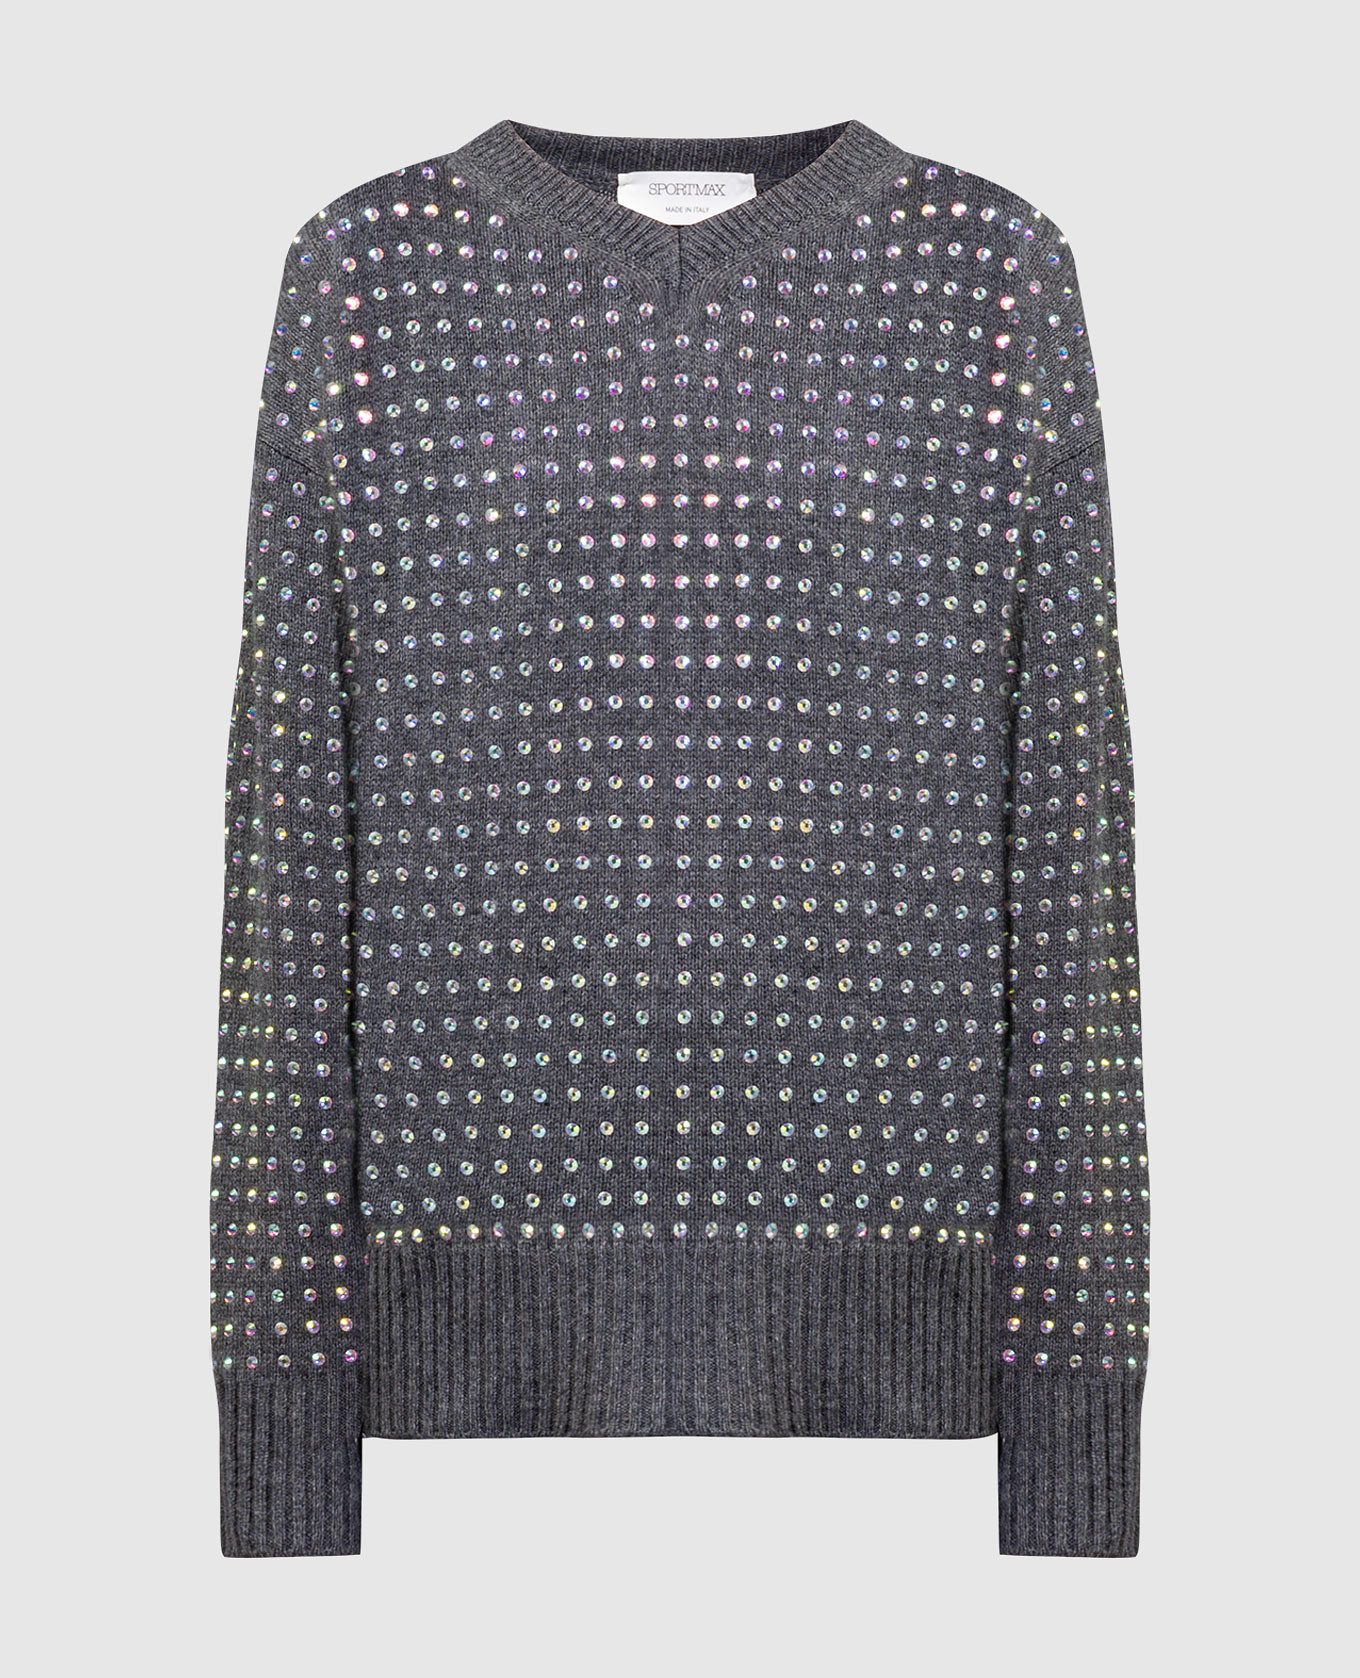 Uta gray pullover with crystals